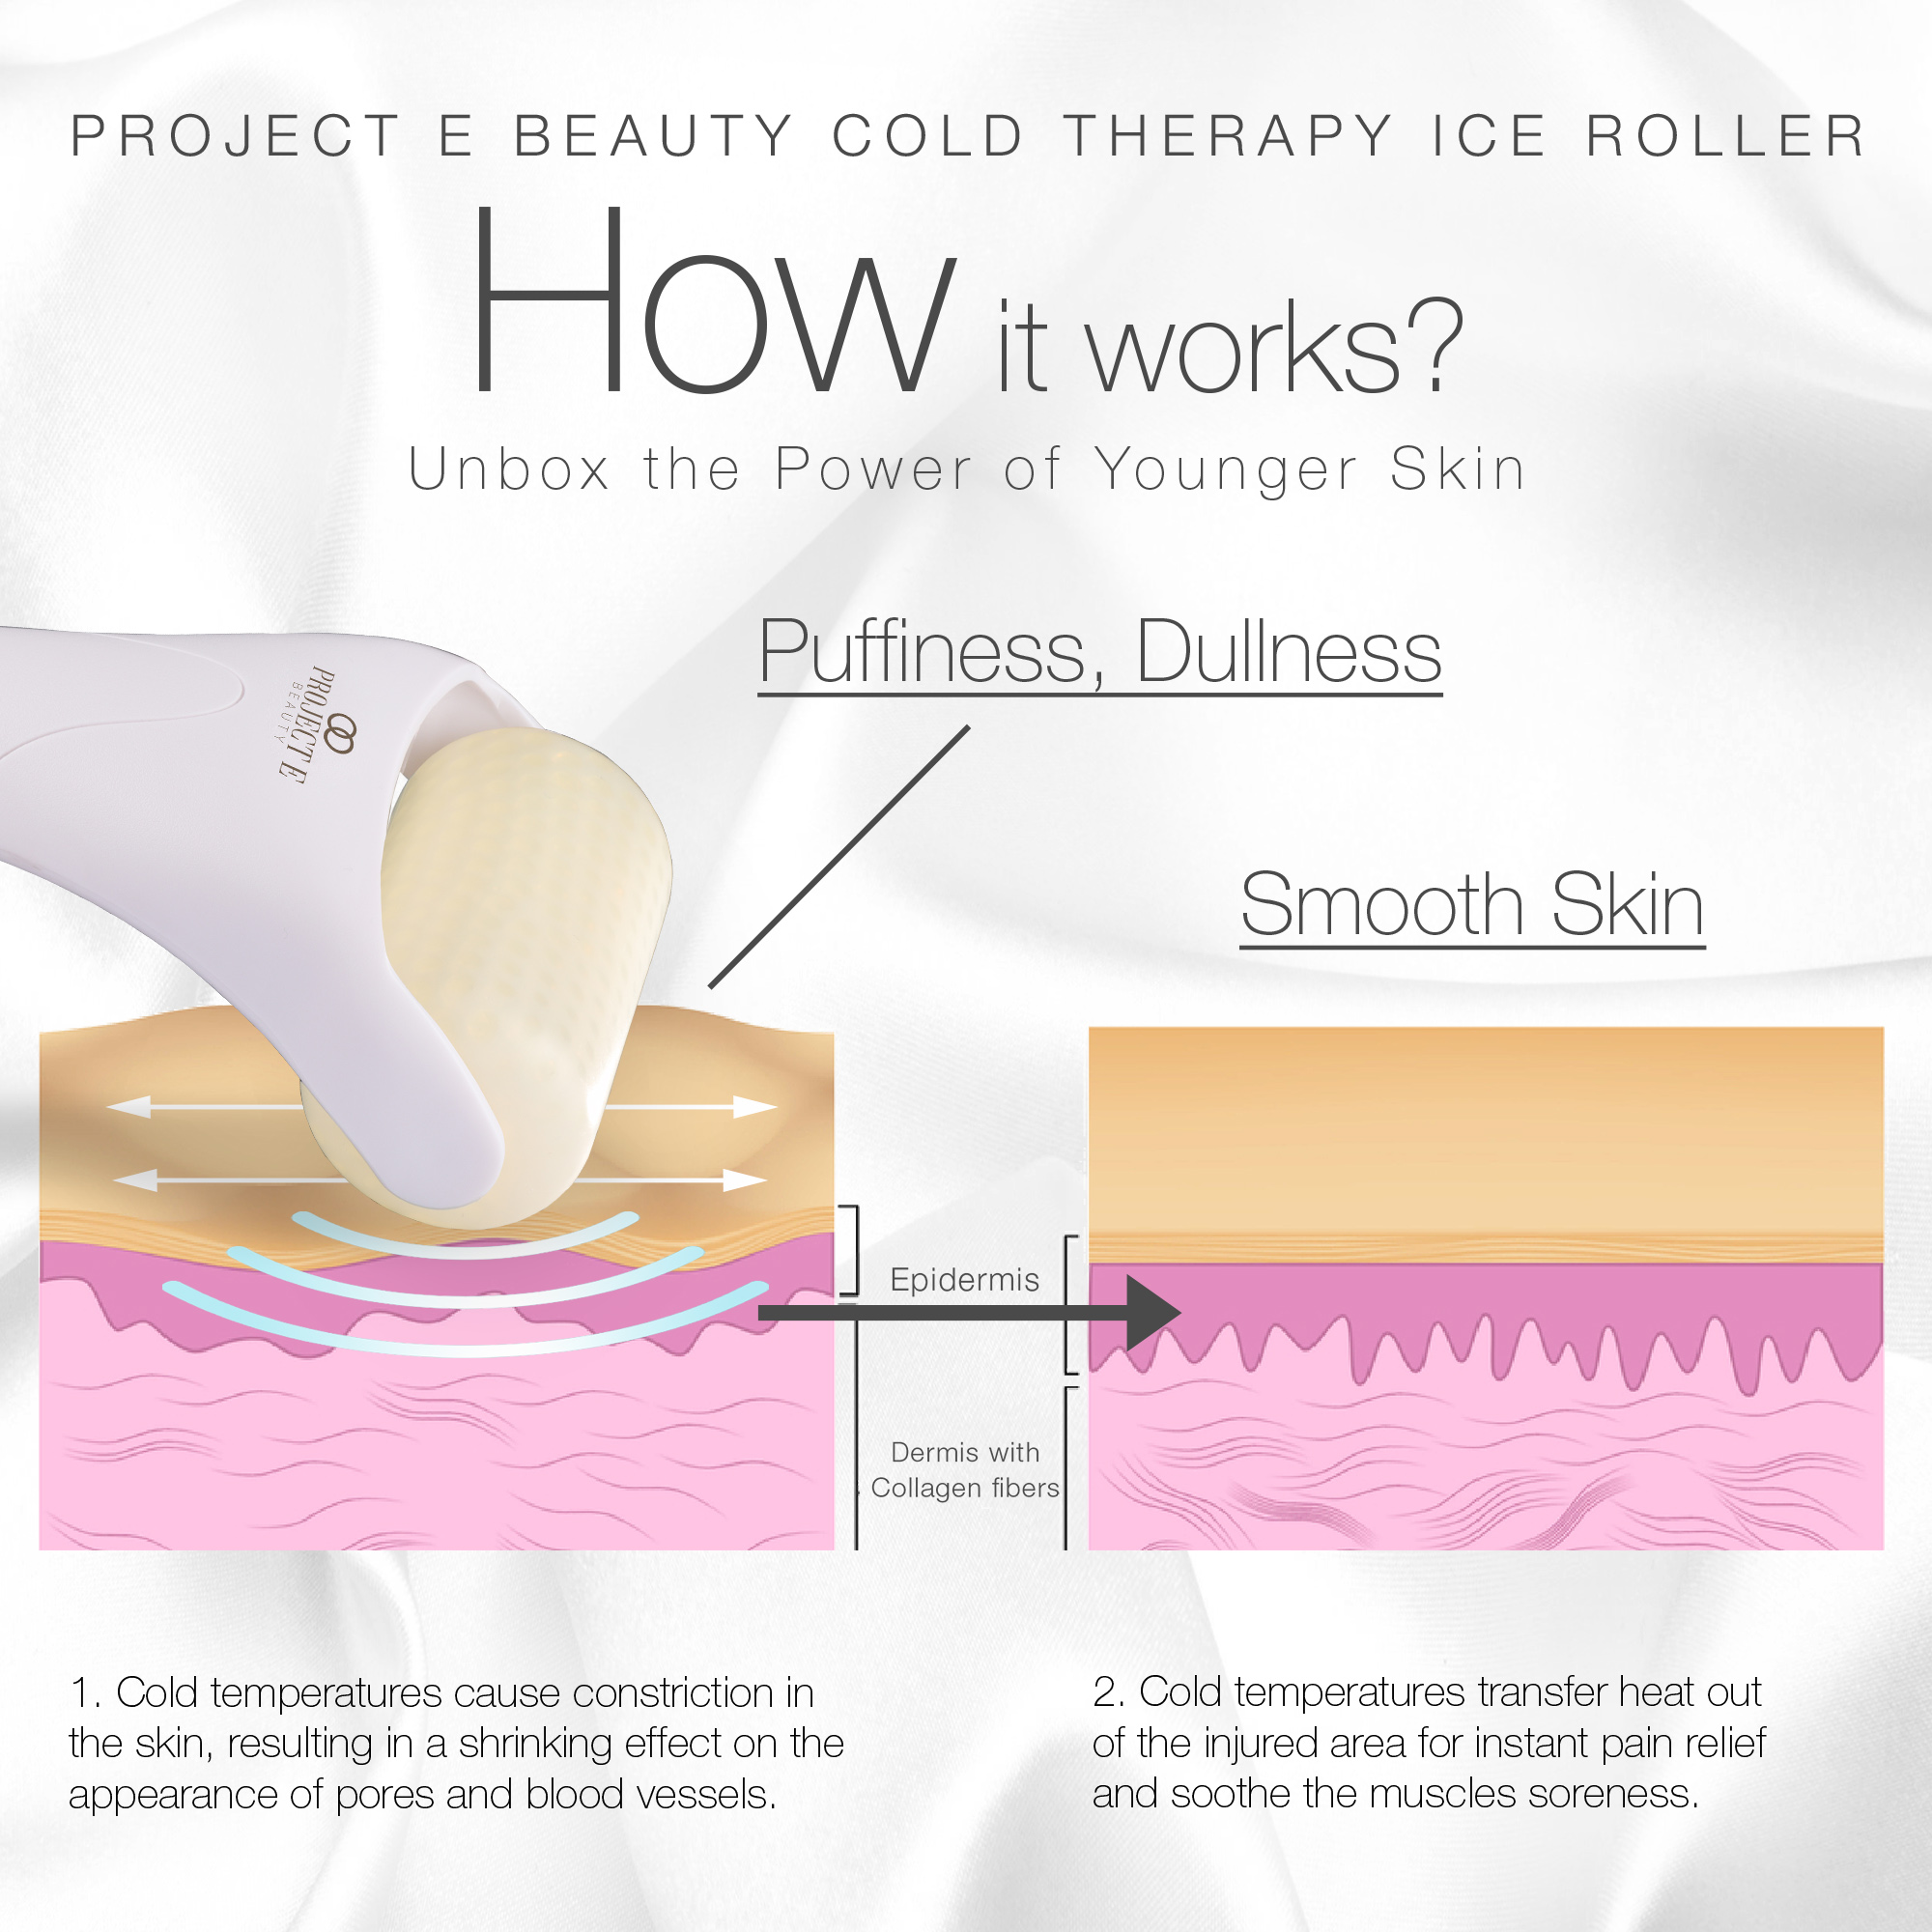 Project E Beauty The Ice Roller | Cryotherapy Treatment | Puffiness & Under Eye Bags | Dark Circles - image 4 of 9